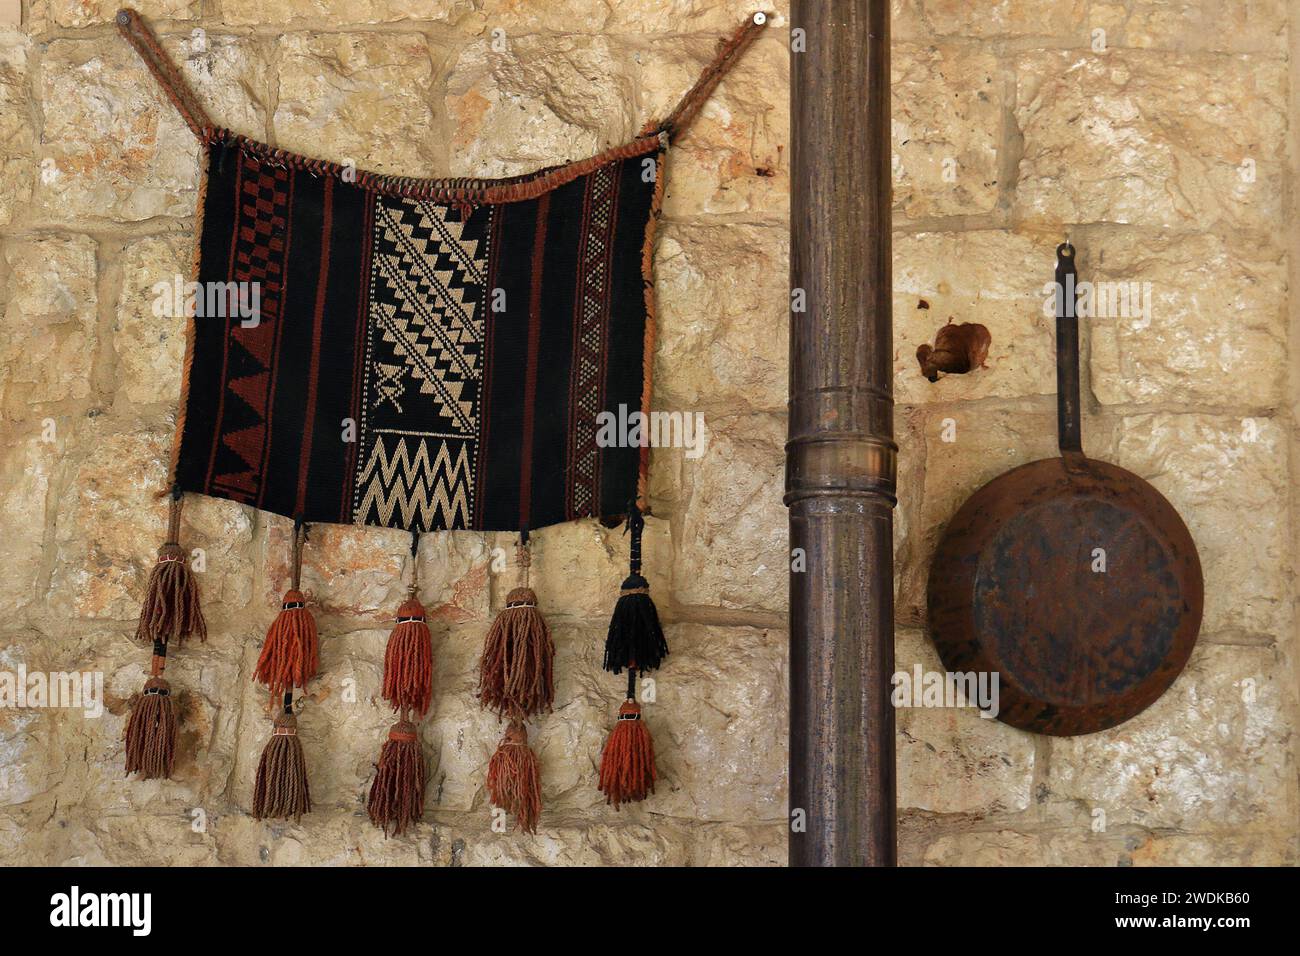 Decorative rug and pan on an indoor stone wall, Stock Photo